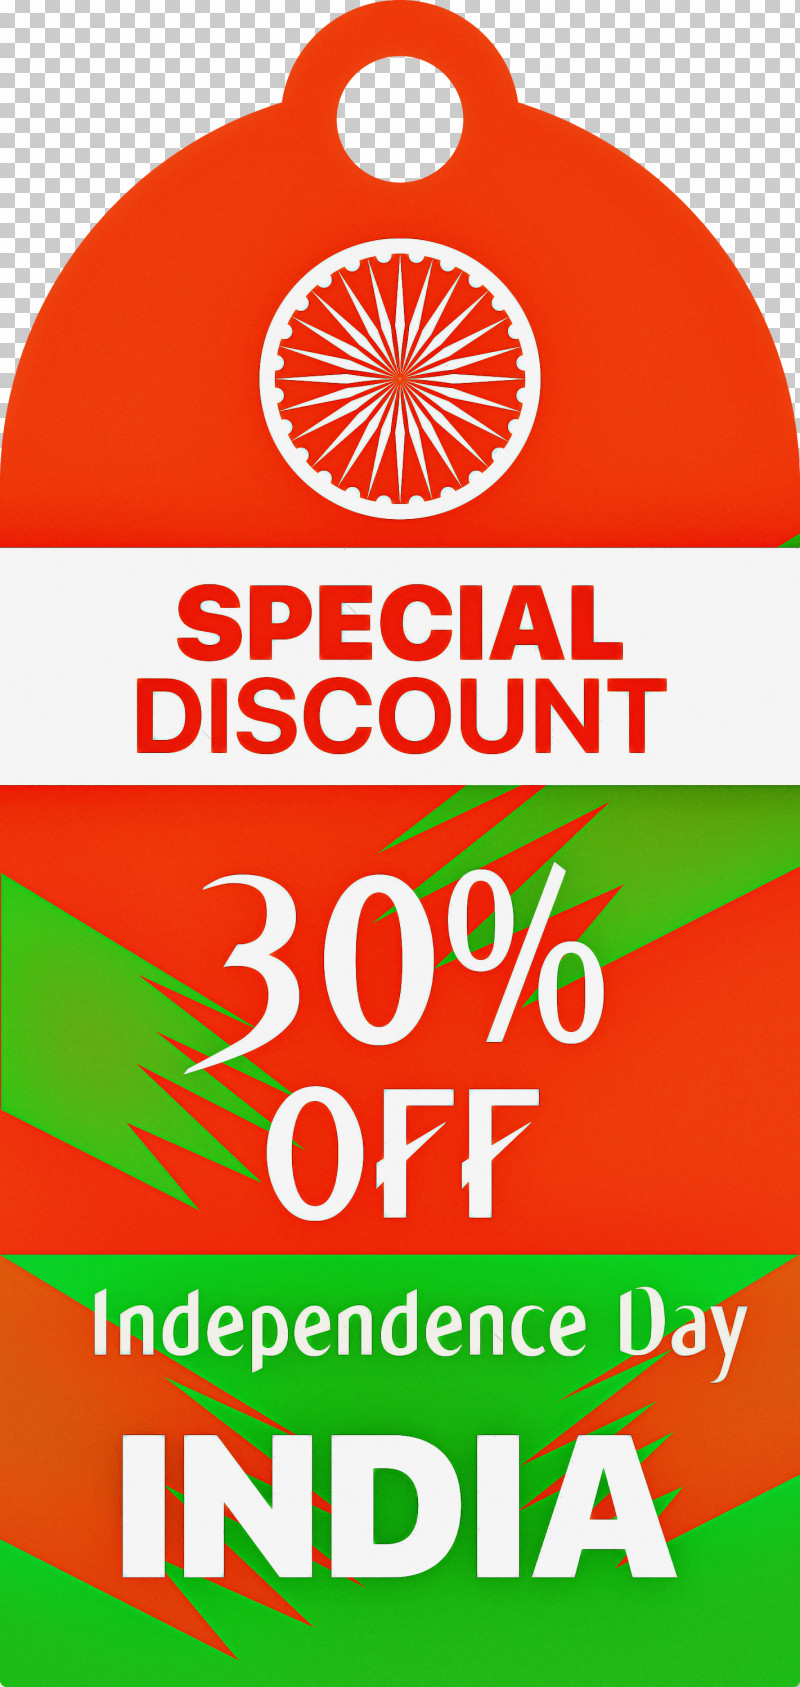 India Indenpendence Day Sale Tag India Indenpendence Day Sale Label PNG, Clipart, Area, India, India Indenpendence Day Sale Label, India Indenpendence Day Sale Tag, Indian Independence Day Free PNG Download